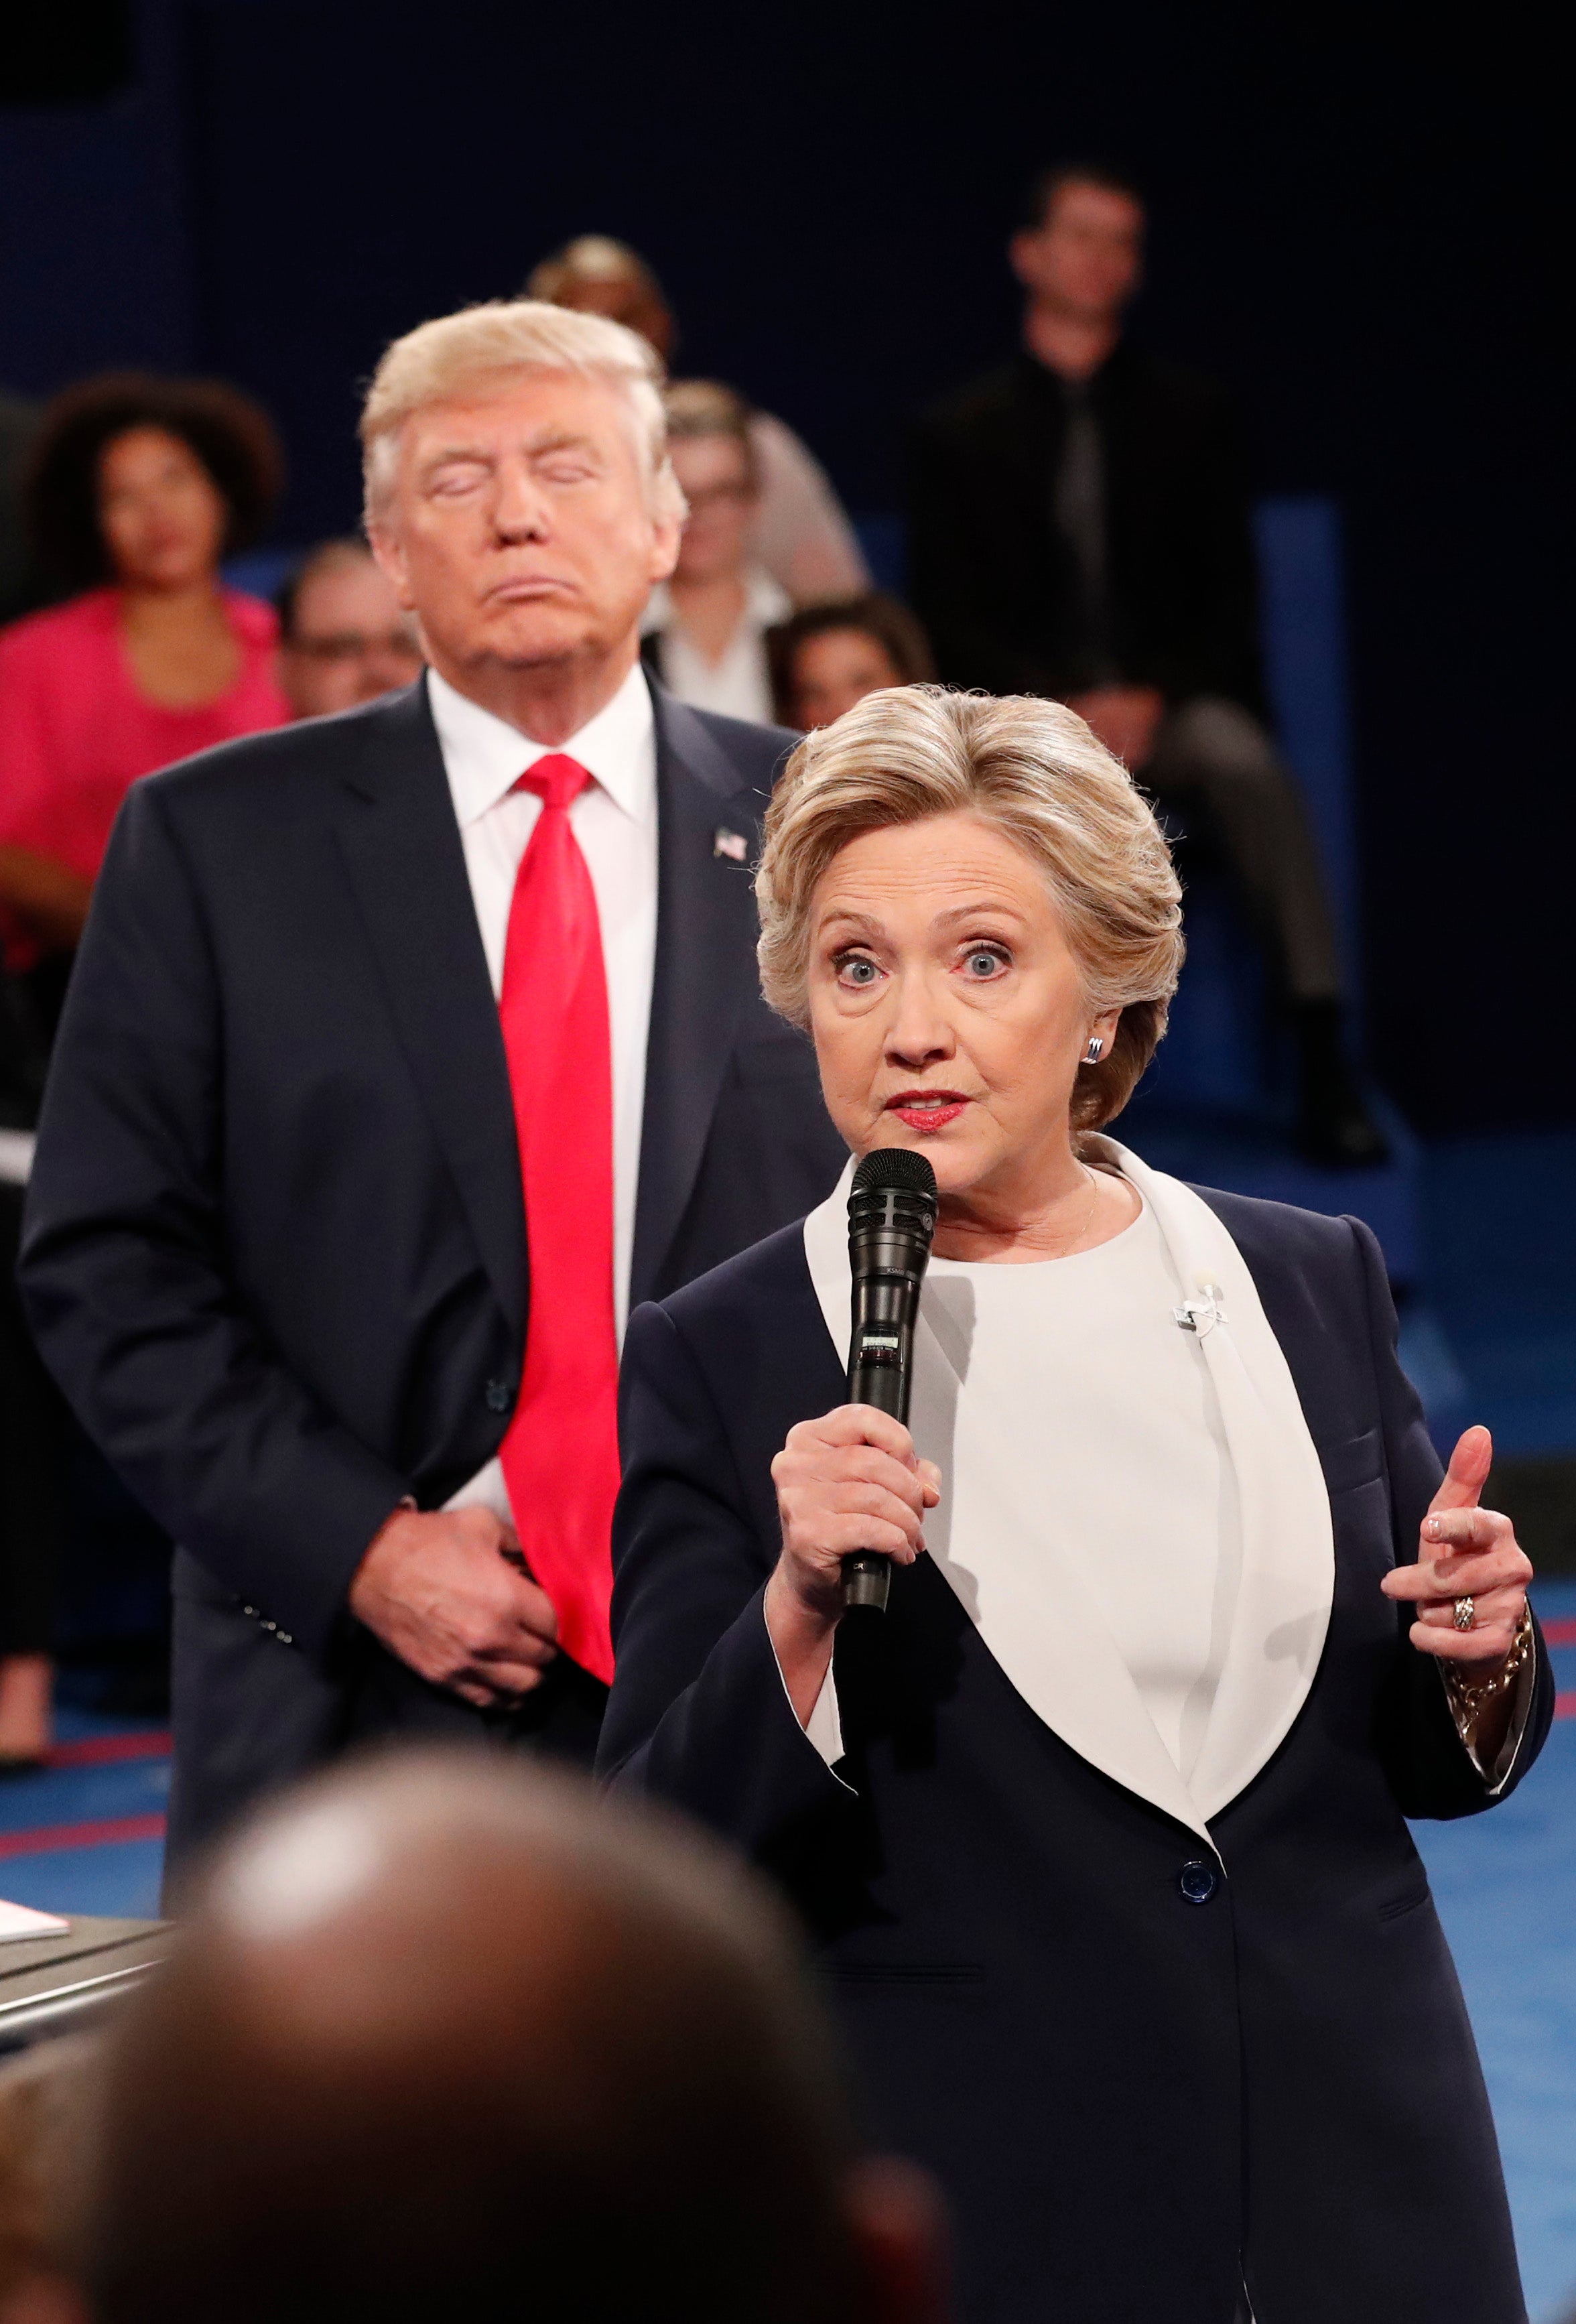 Did Donald Trump Just Body Shame Hillary Clinton? This Clip Sure Sounds Like It
